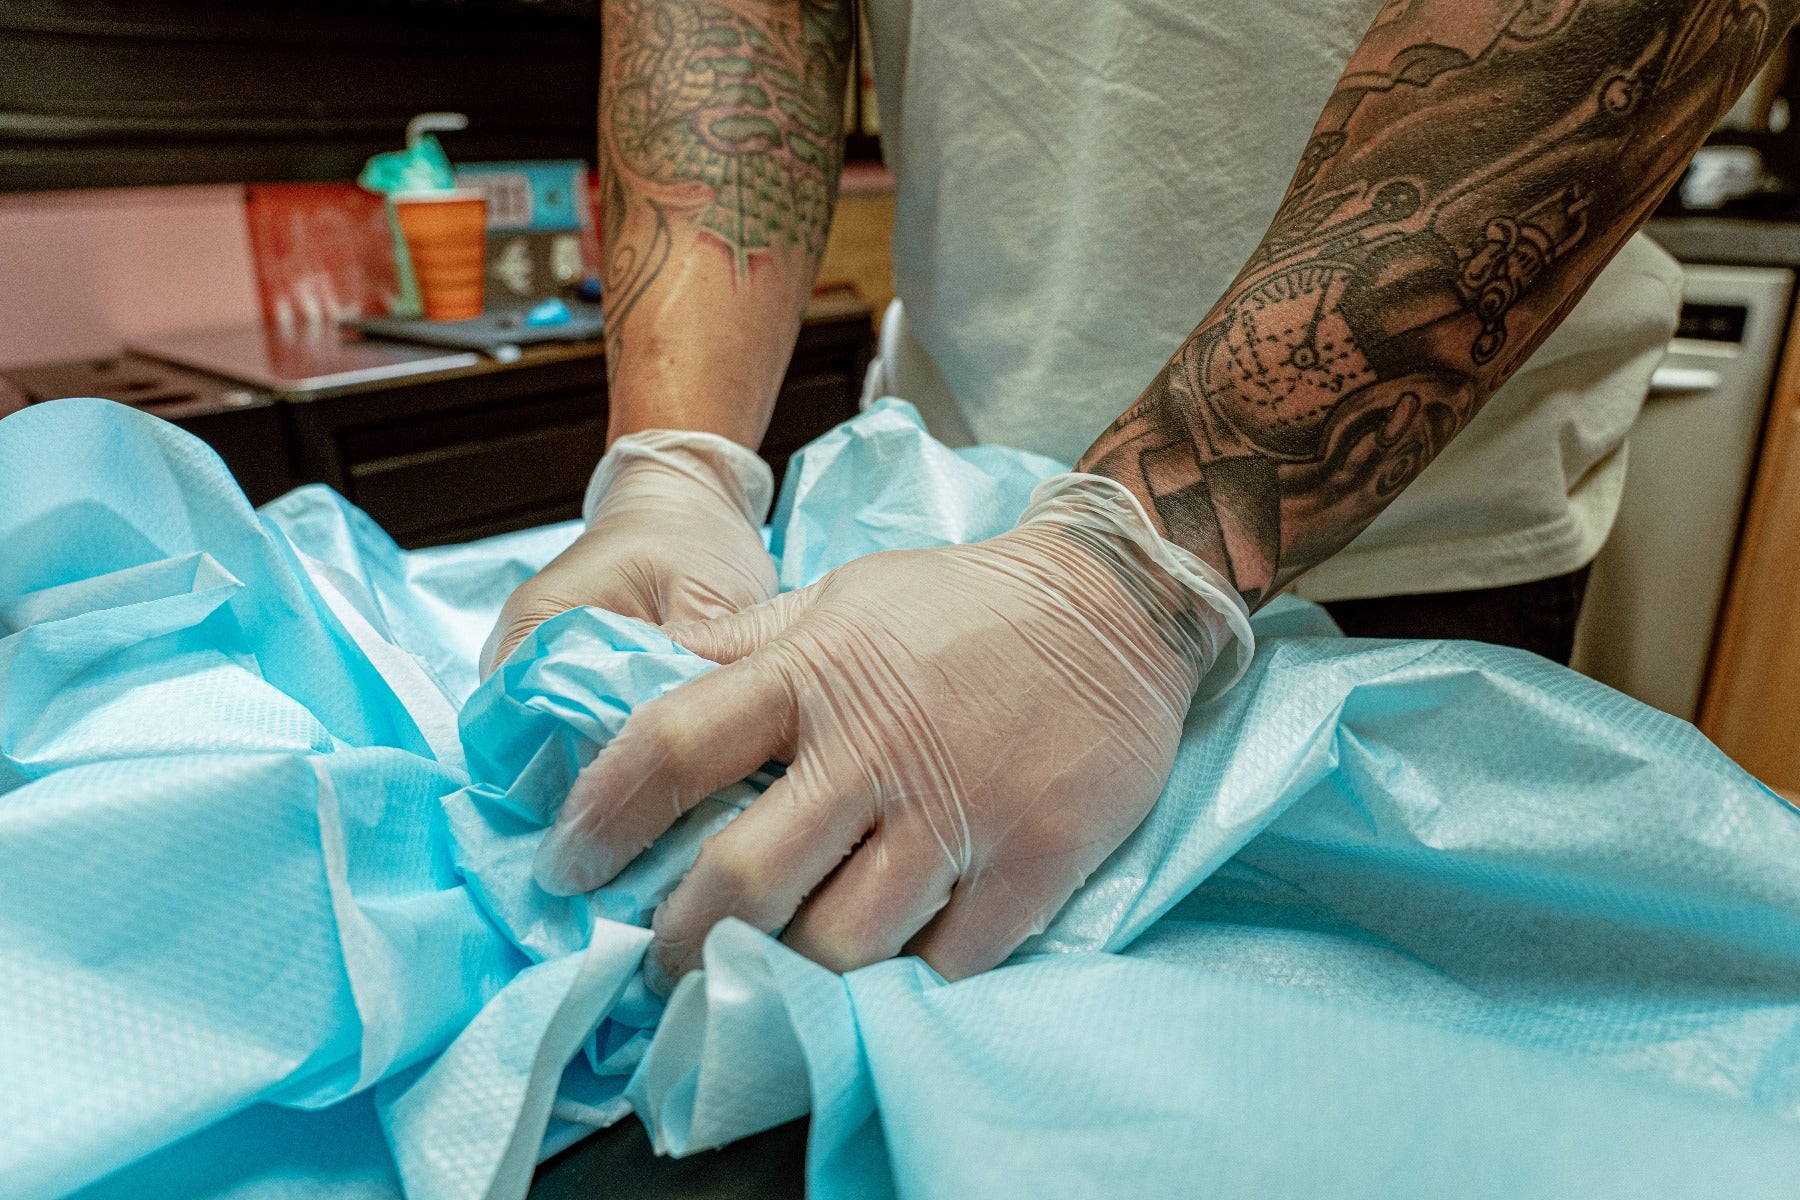 Vinyl Disposable Gloves showcased on a tattoo artist's hands setting up his station